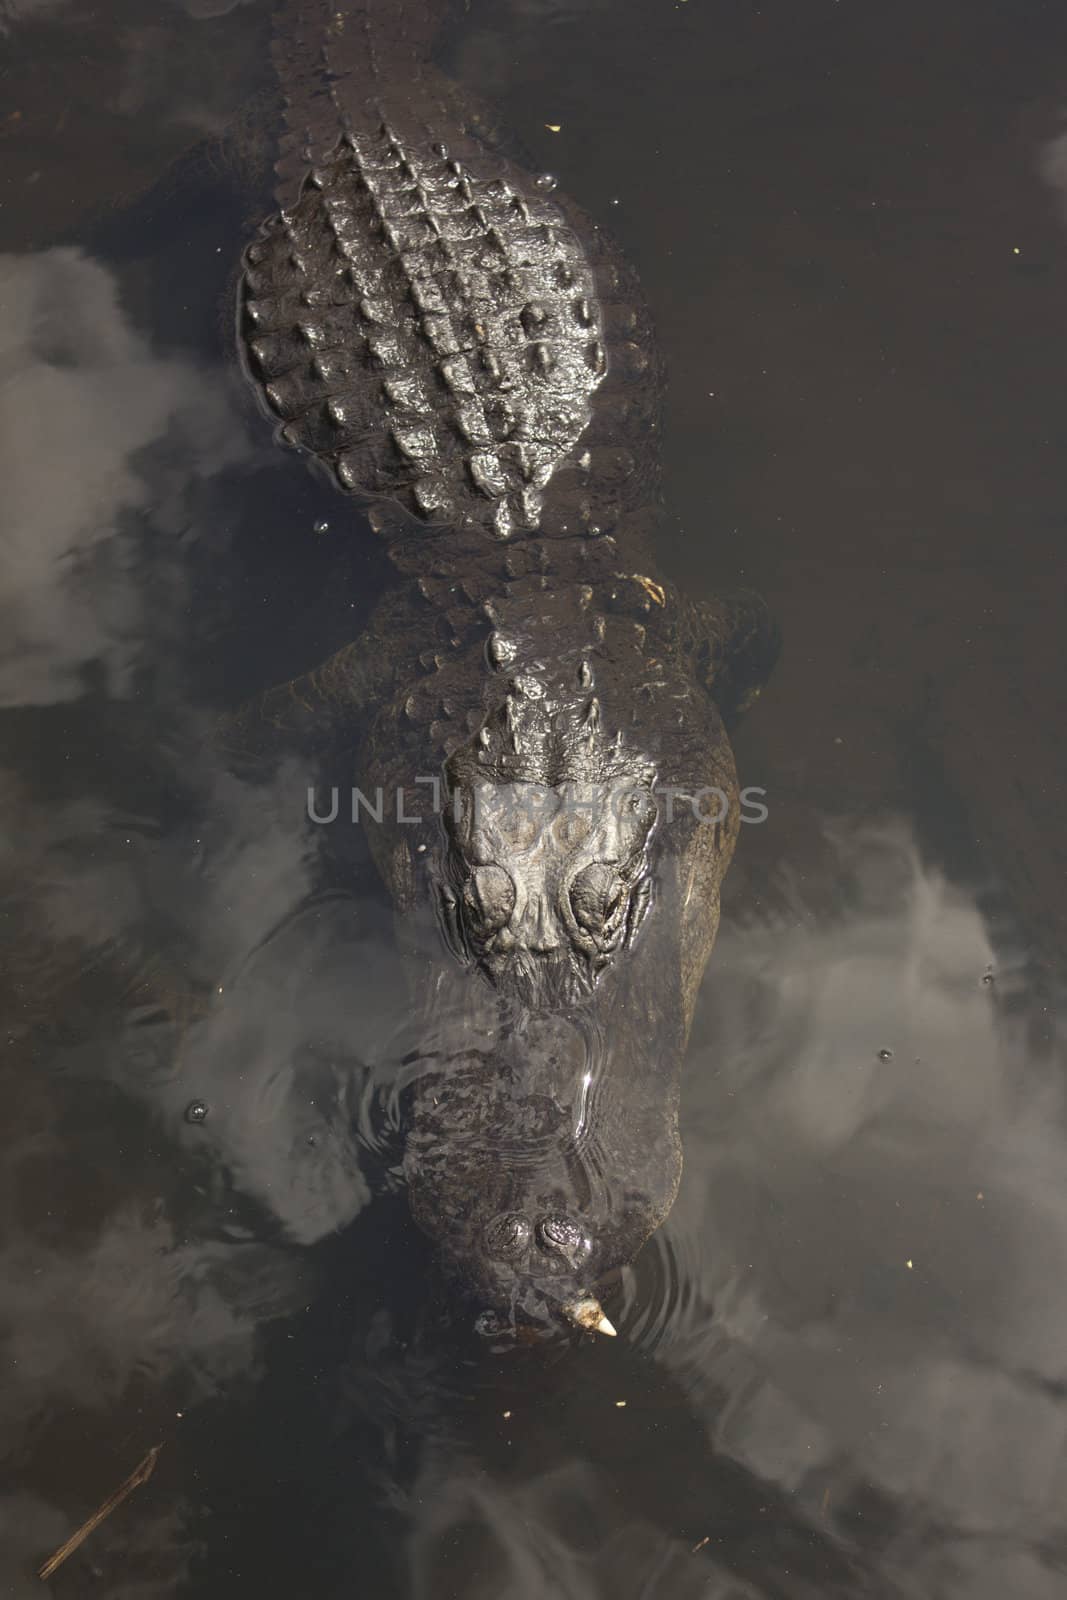 A wild alligator in the Everglades National Park in Florida.